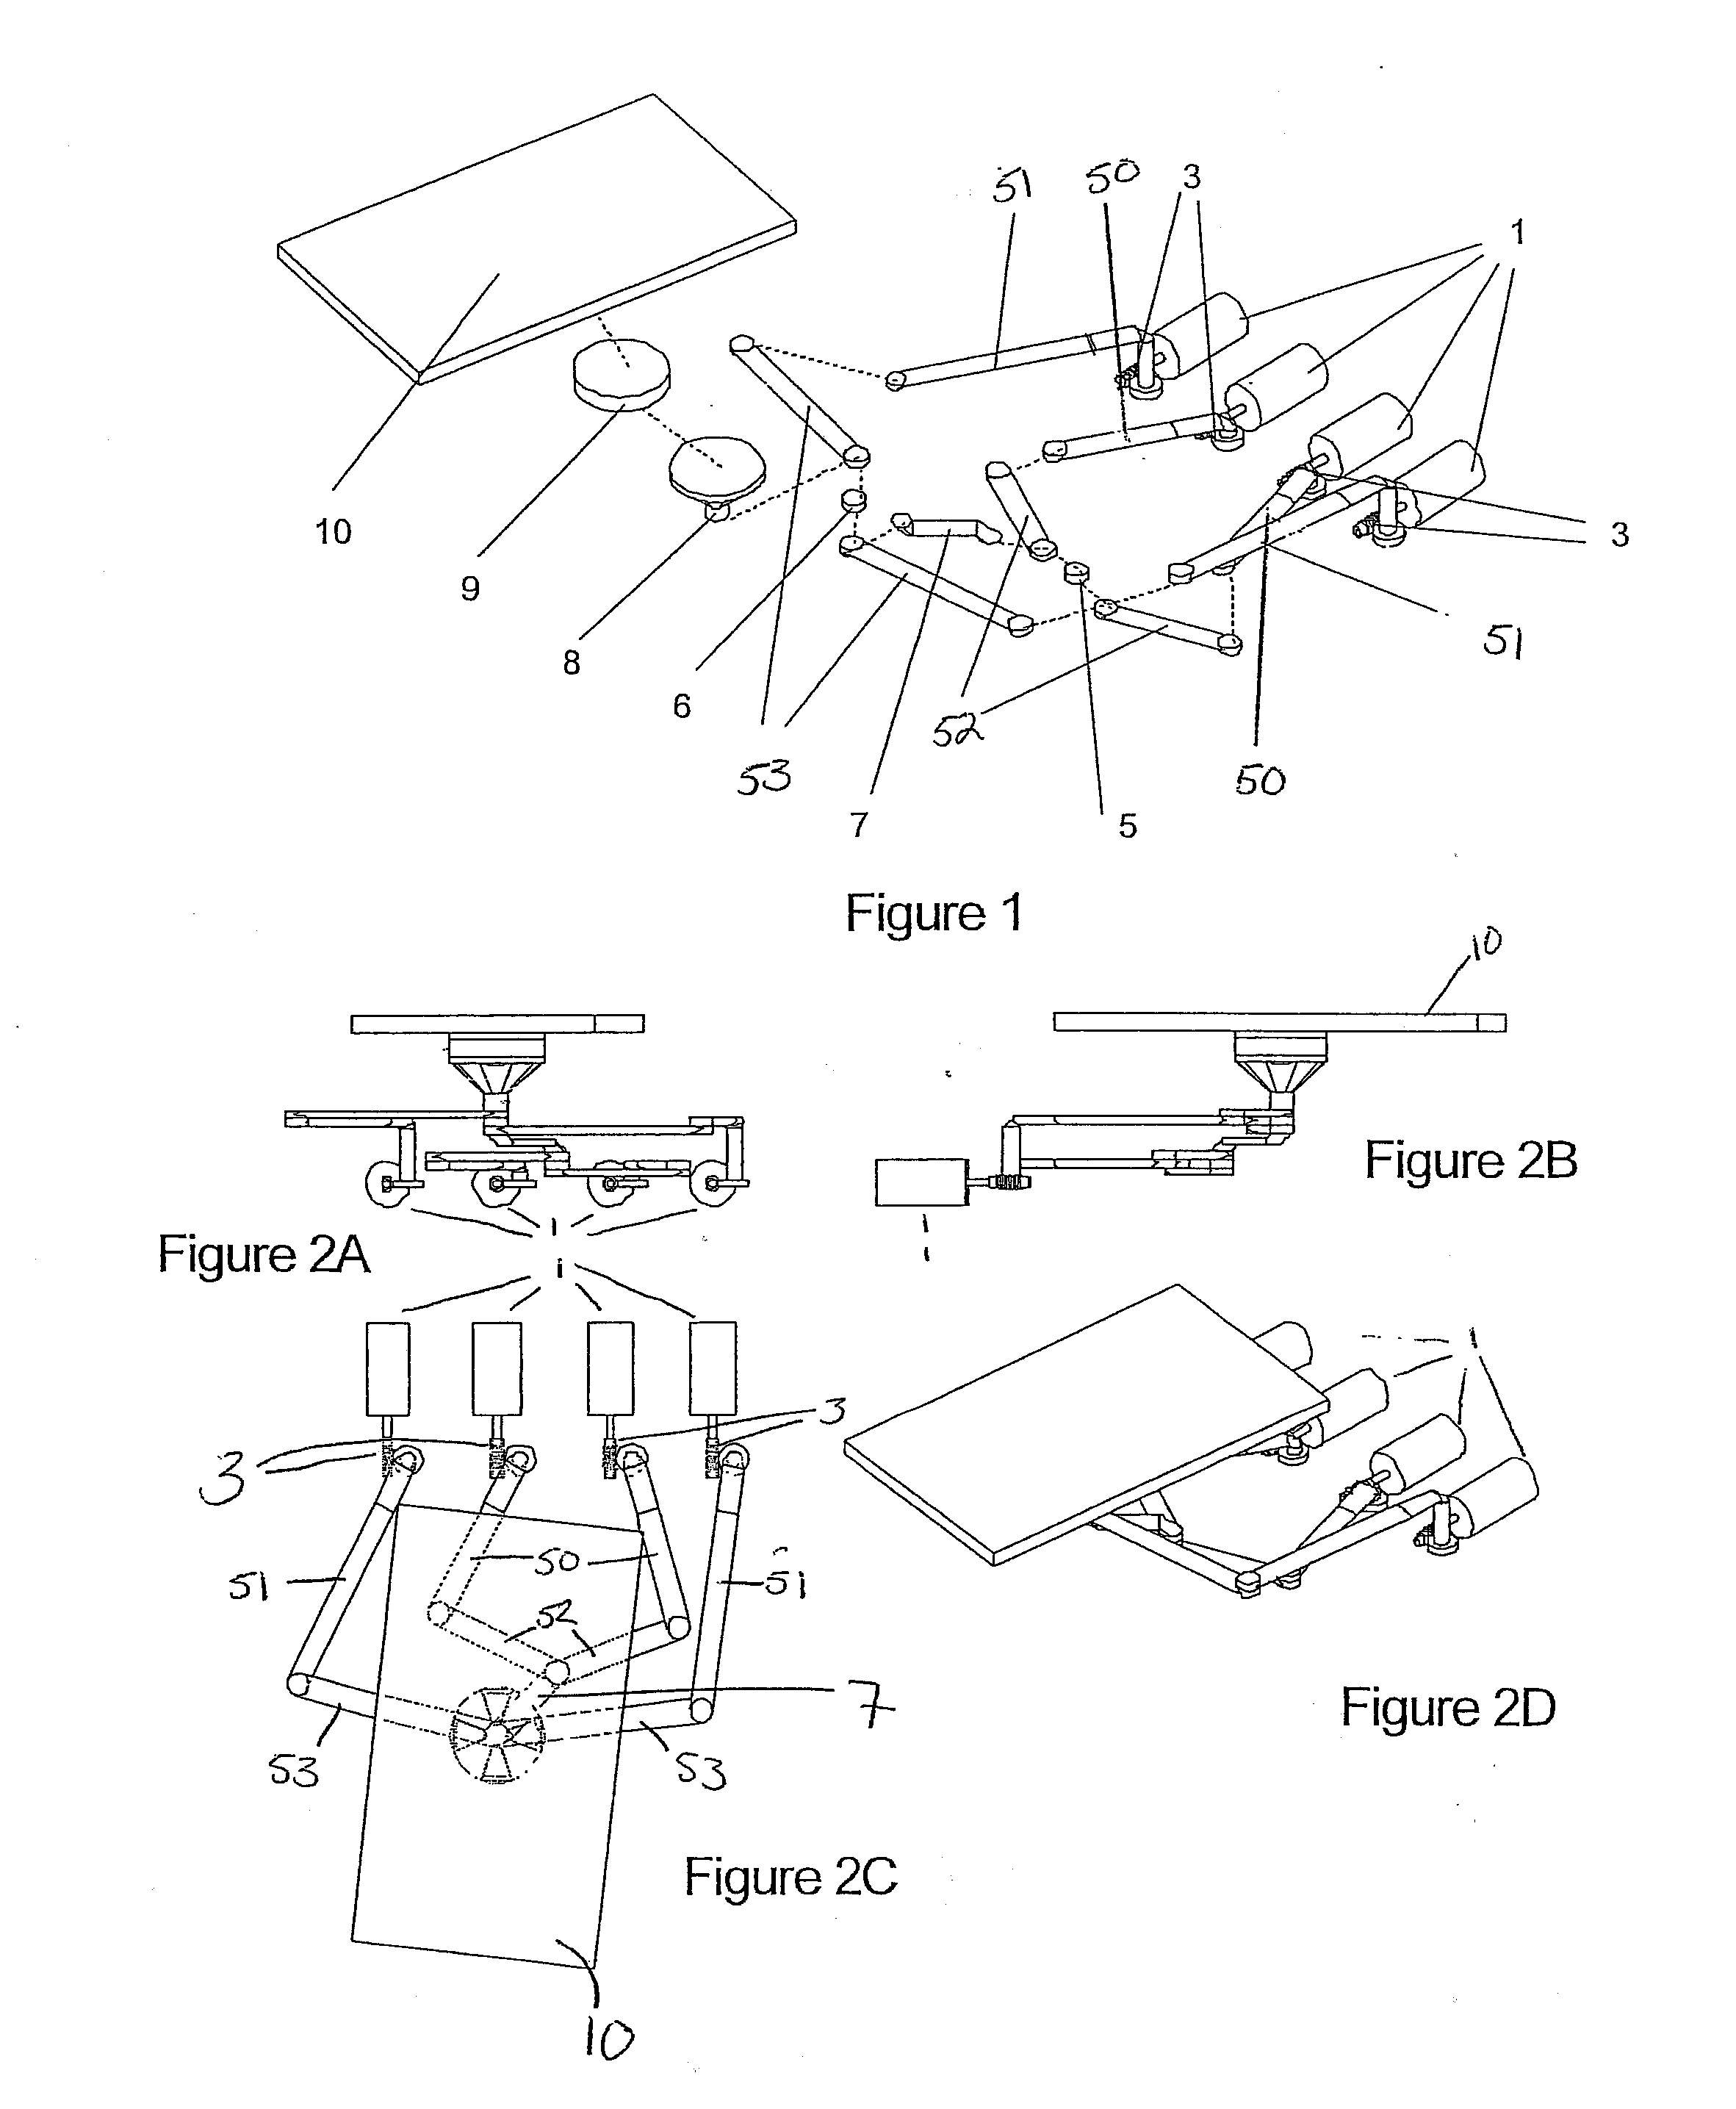 Presentation system with movable display devices